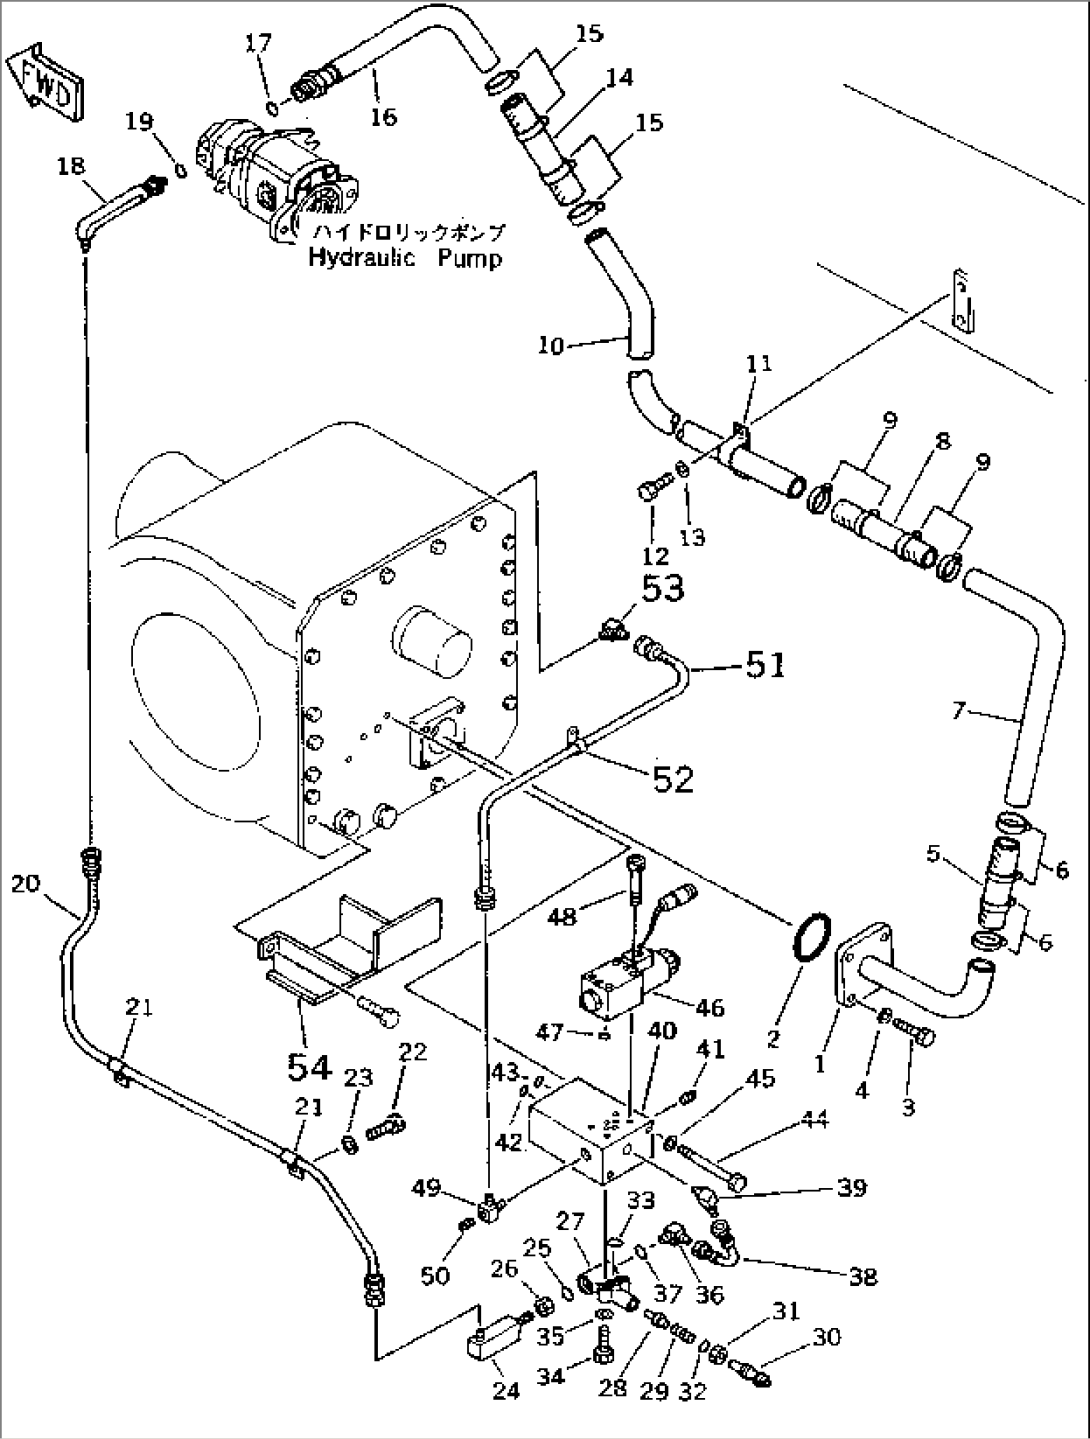 DIFFERENTIAL LOCK PIPING (FOR DIFFERENTIAL LOCK)